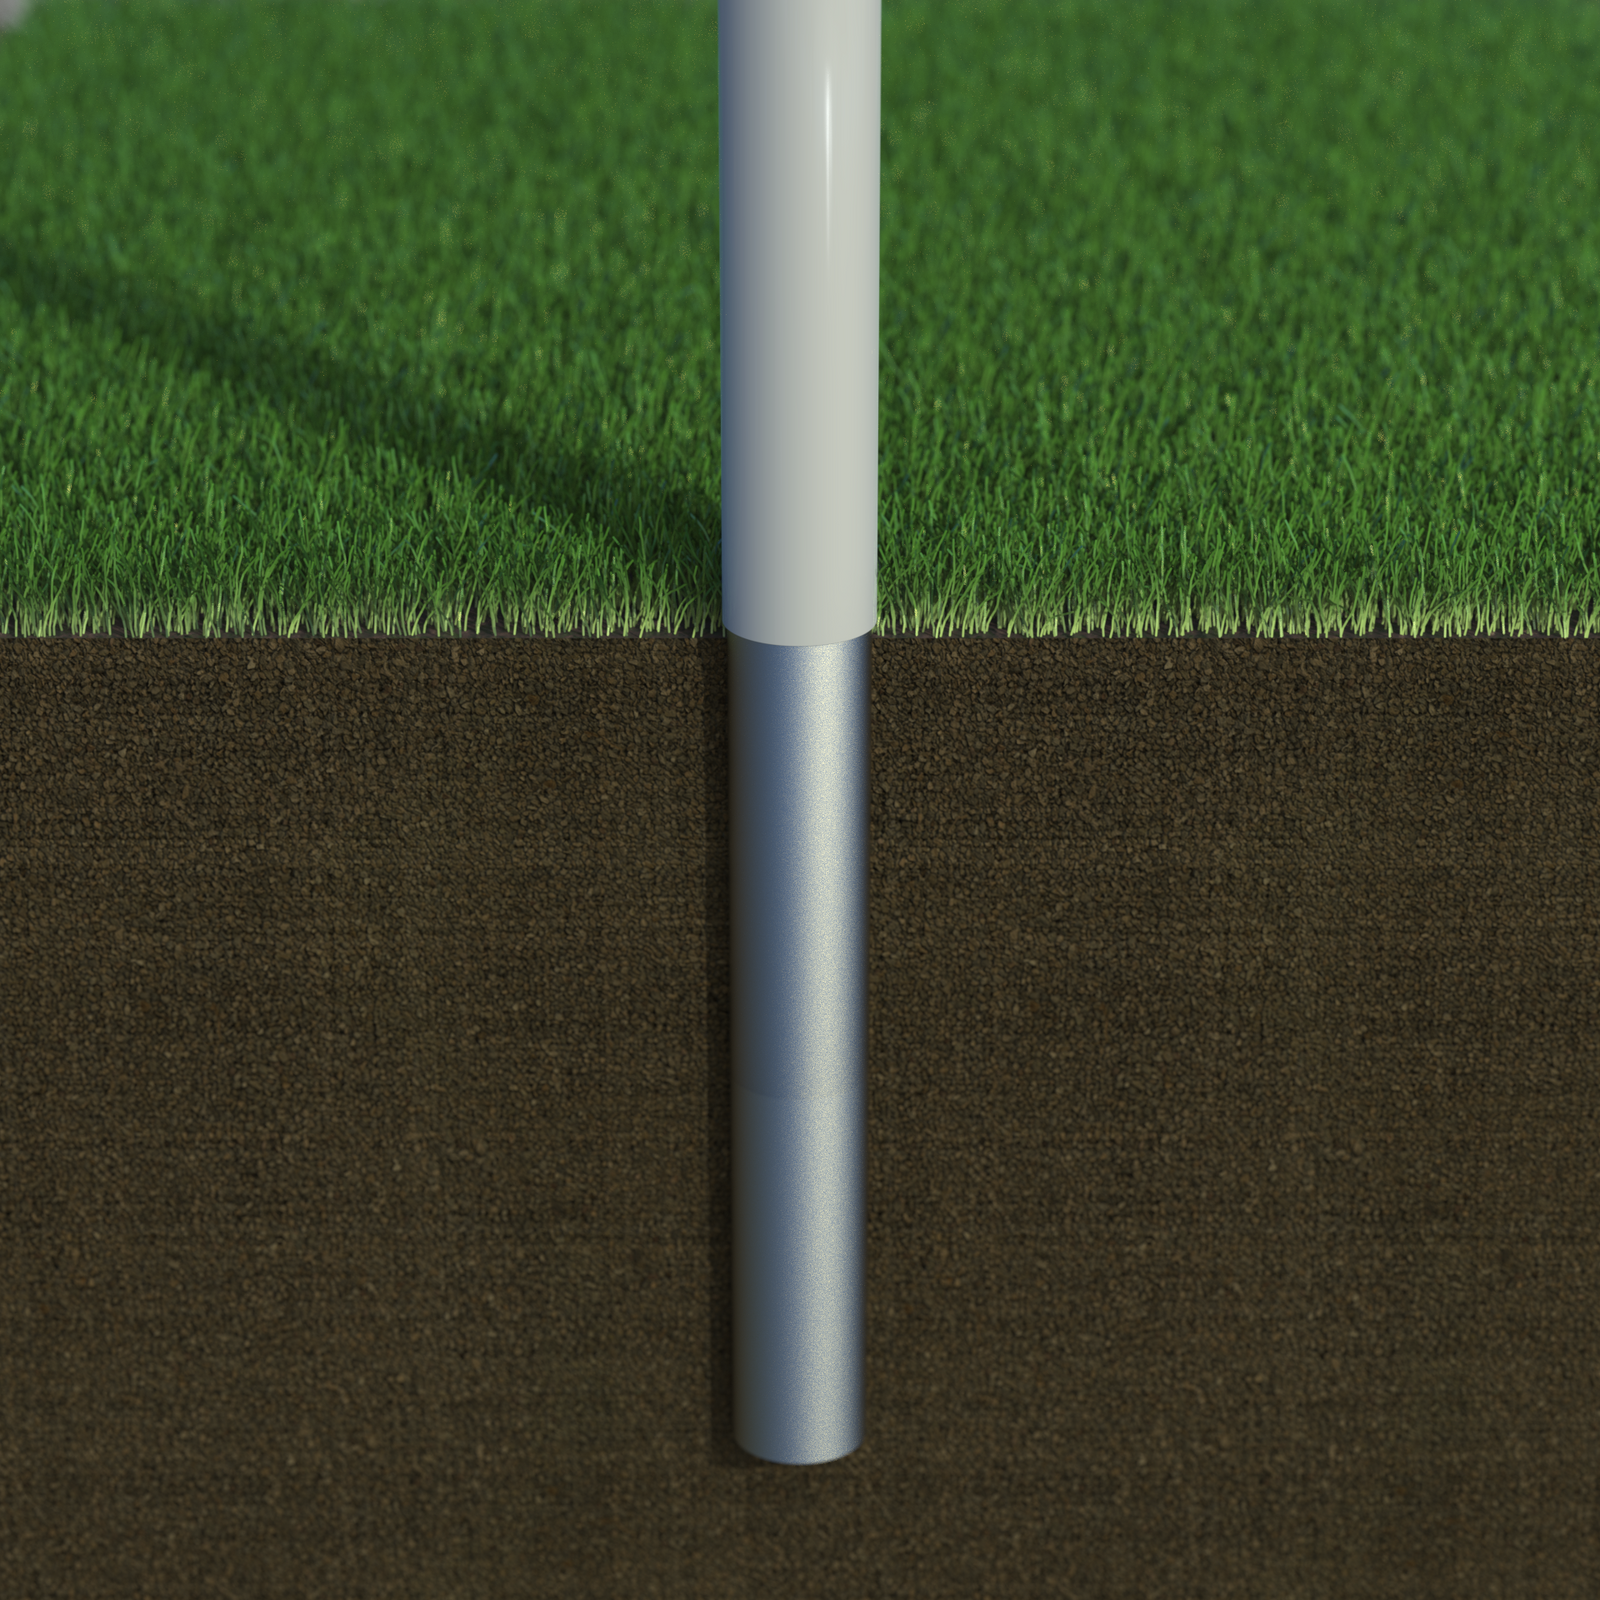 3.7m x 3.1m FORZA PVC Rugby Posts